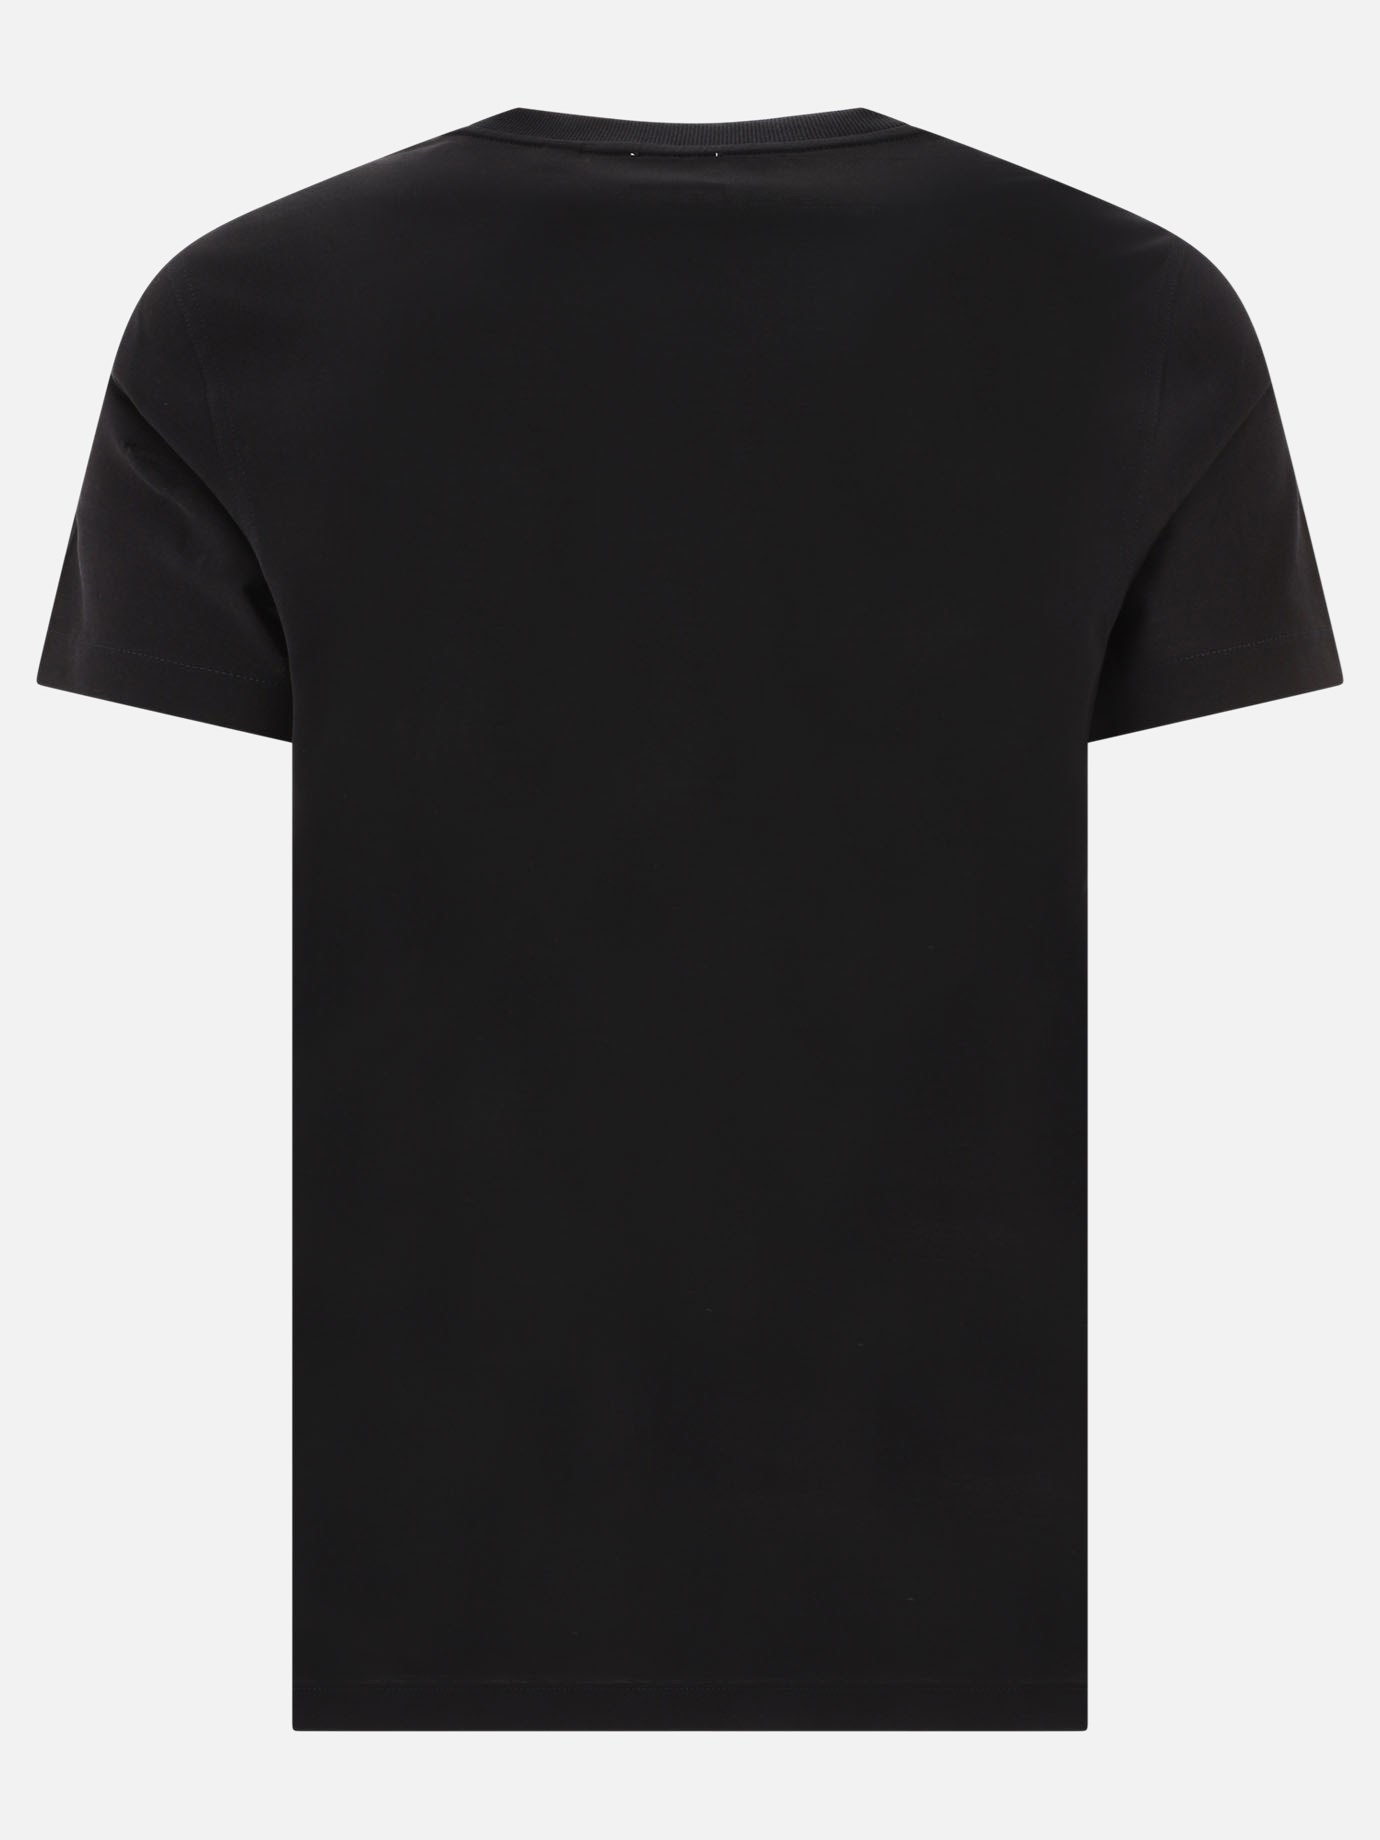 T-shirt  Parker  by Burberry